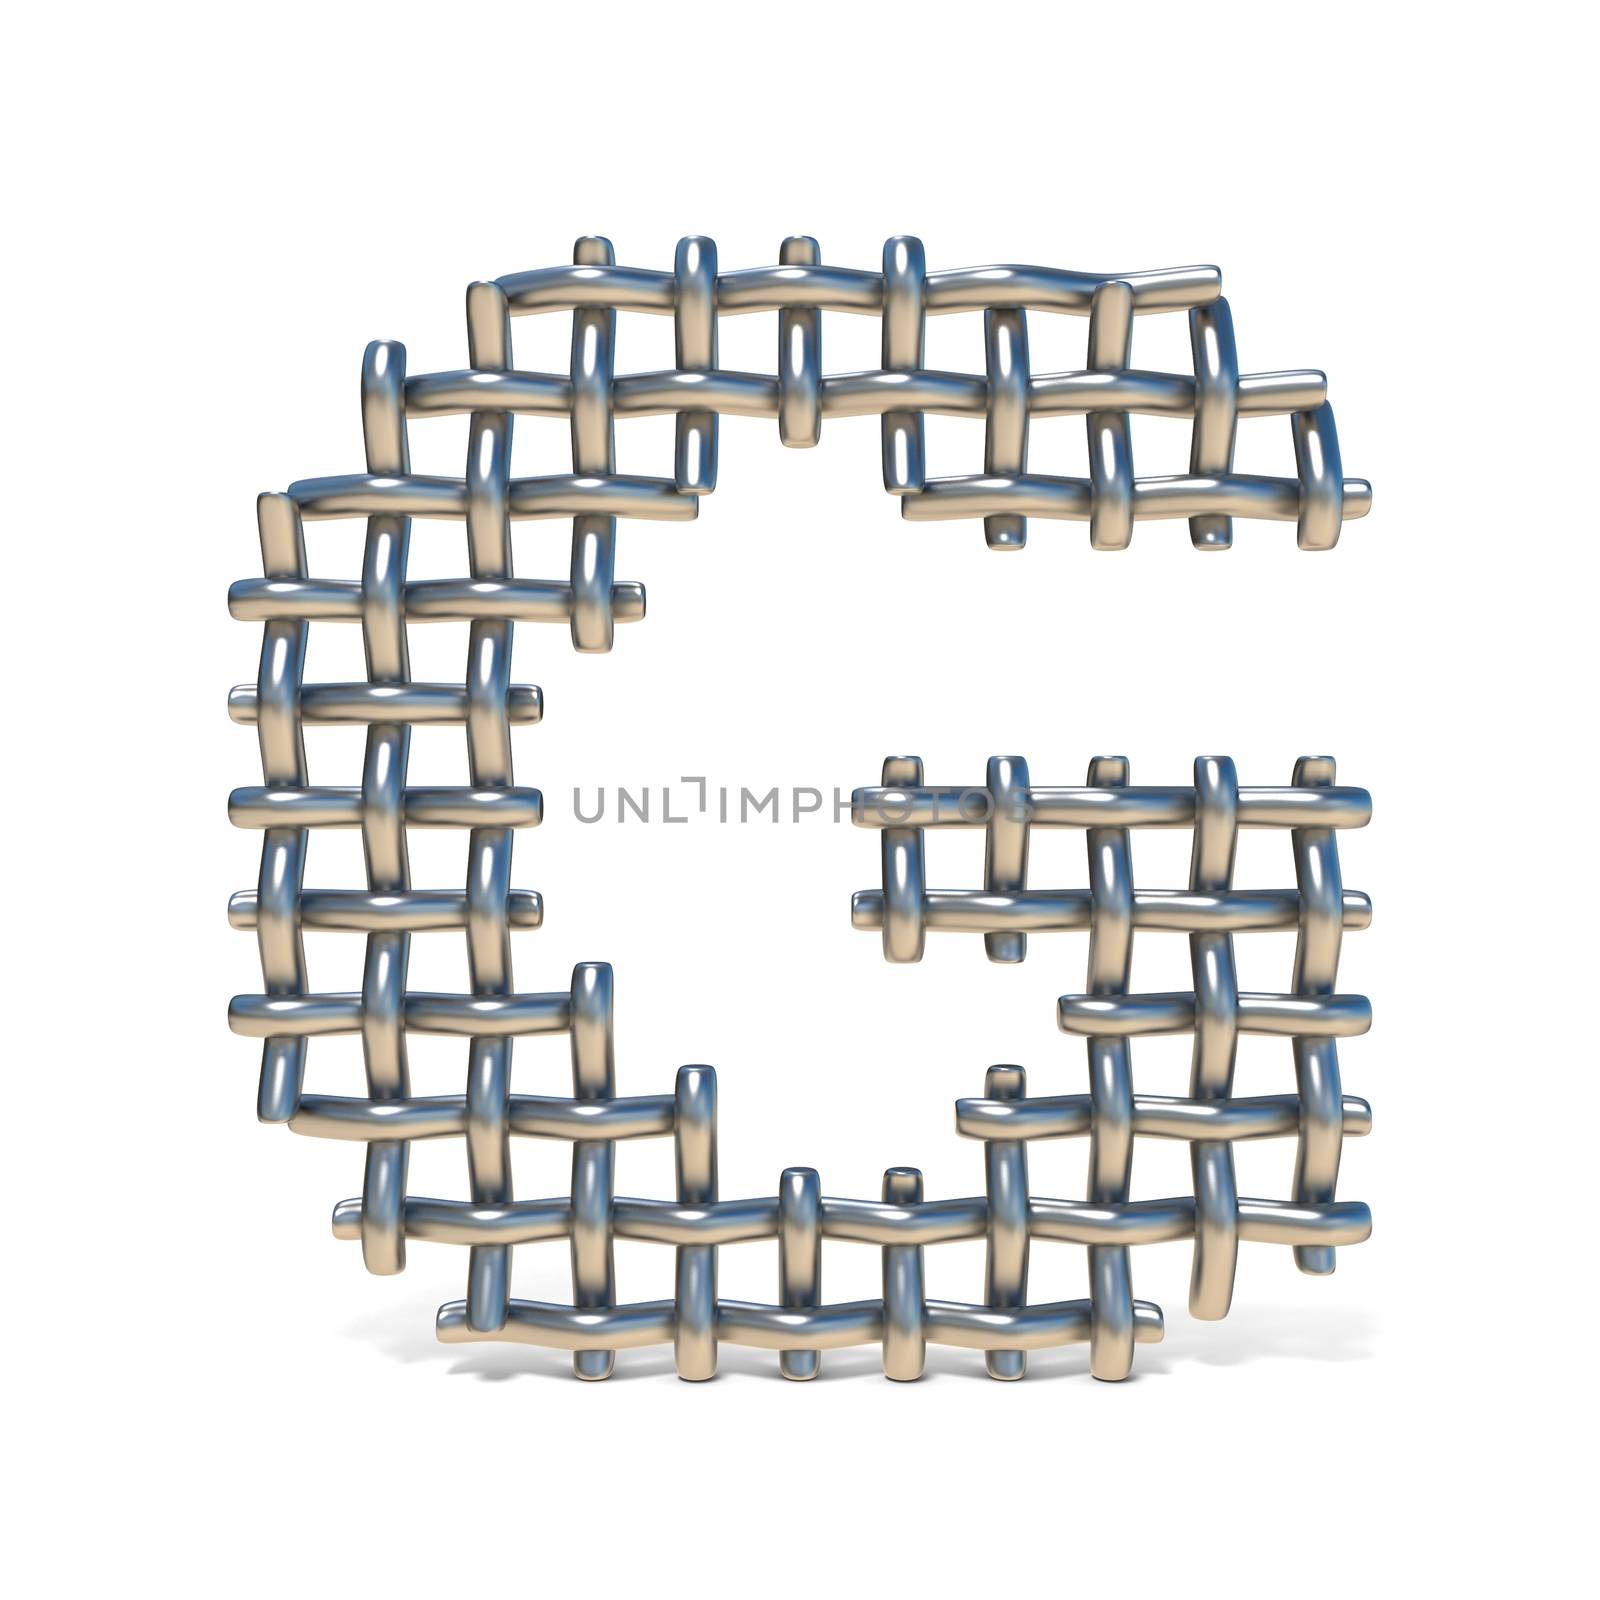 Metal wire mesh font LETTER G 3D render illustration isolated on white background